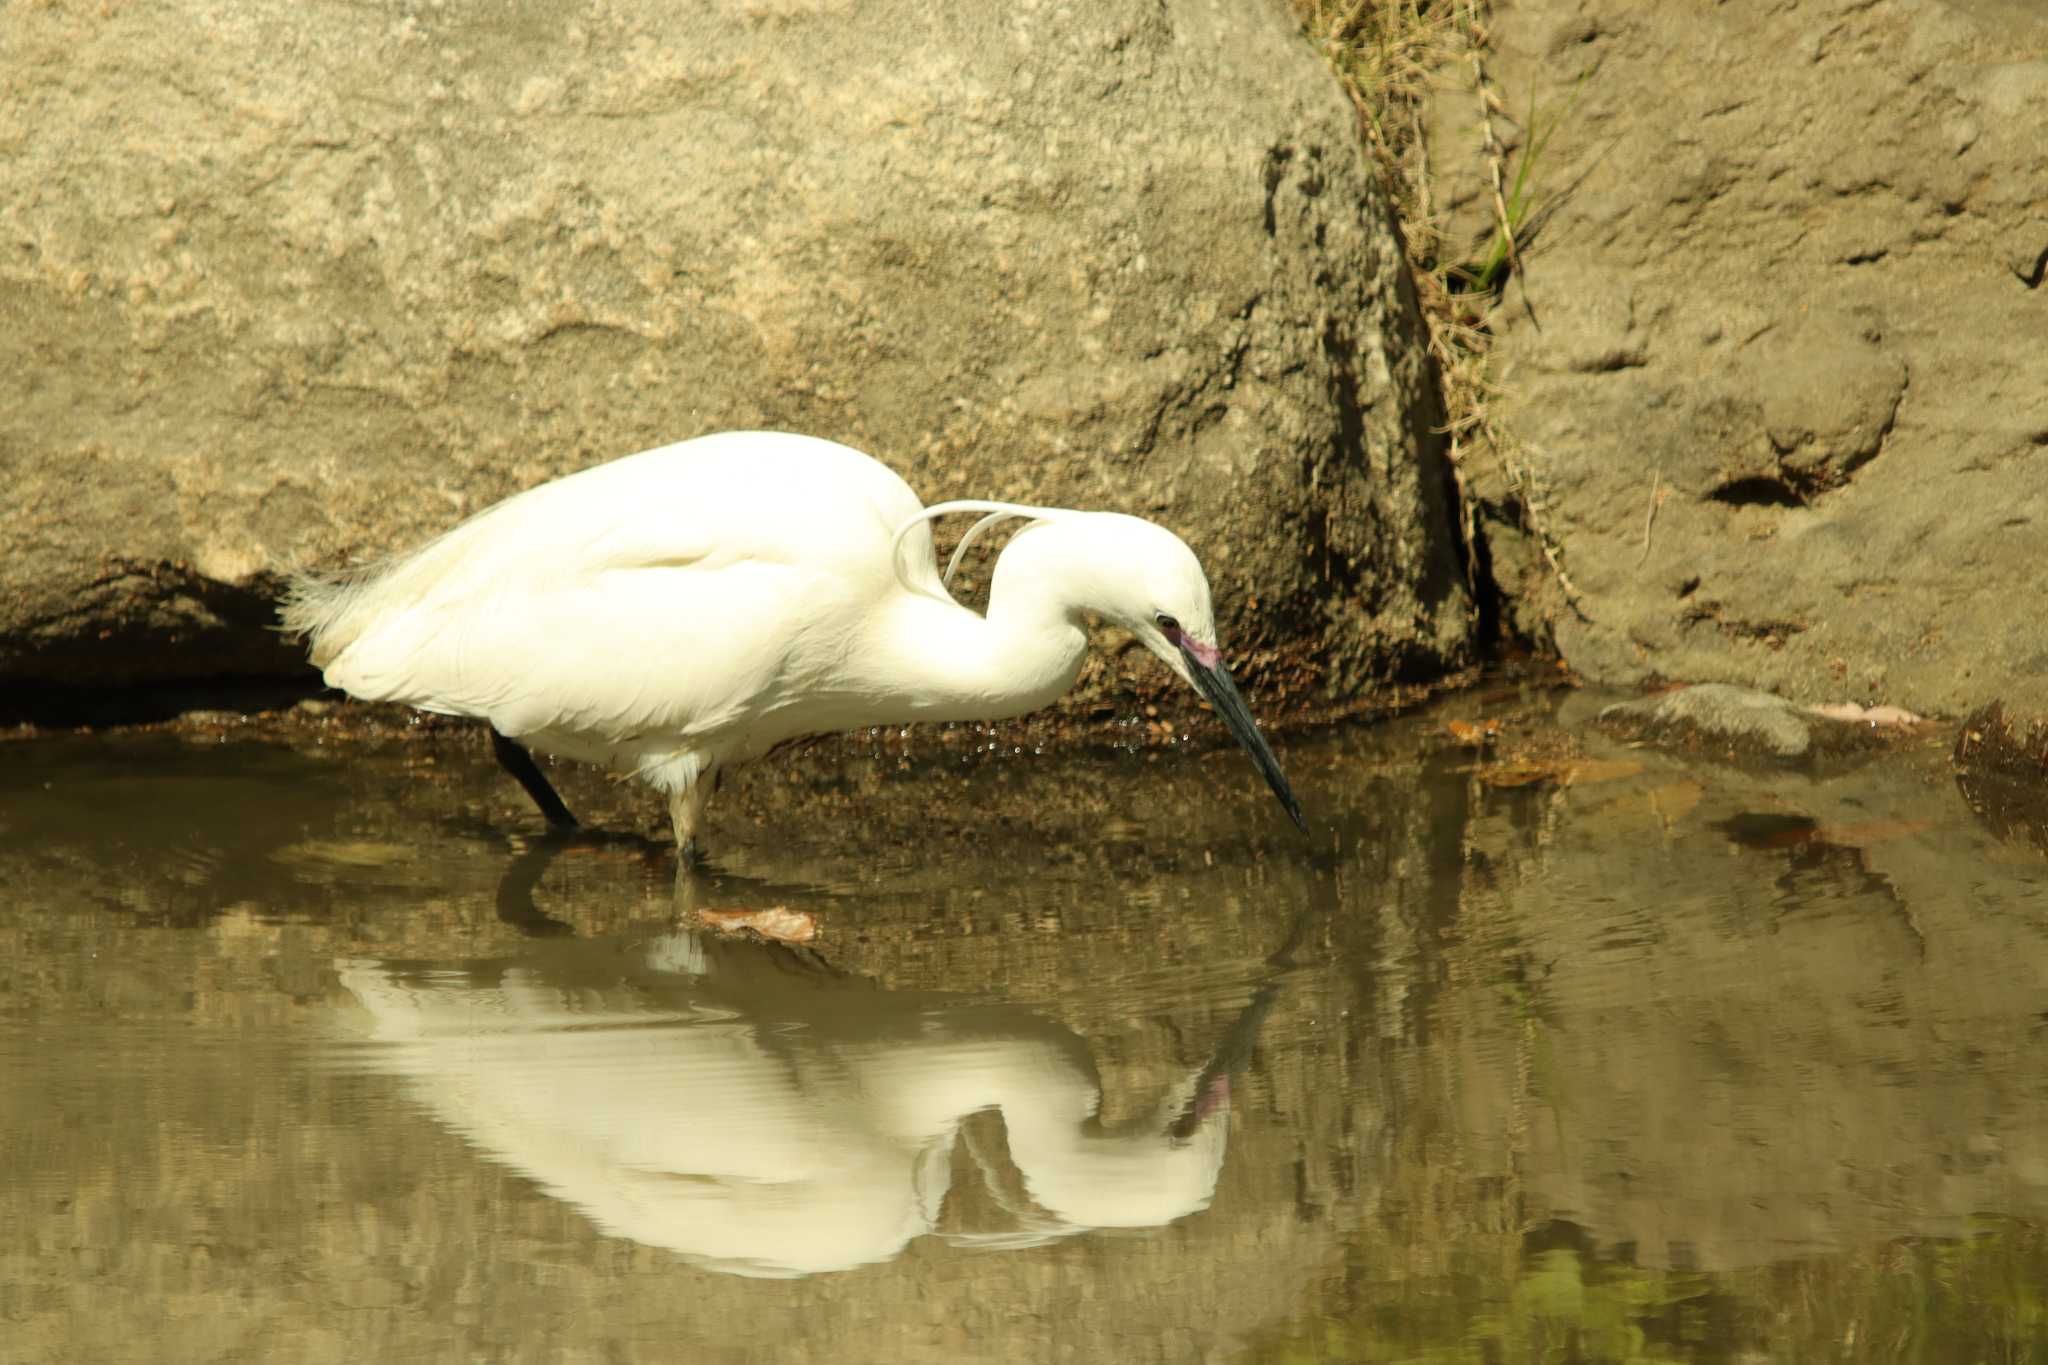 Photo of Little Egret at Osaka castle park by 蕾@sourai0443